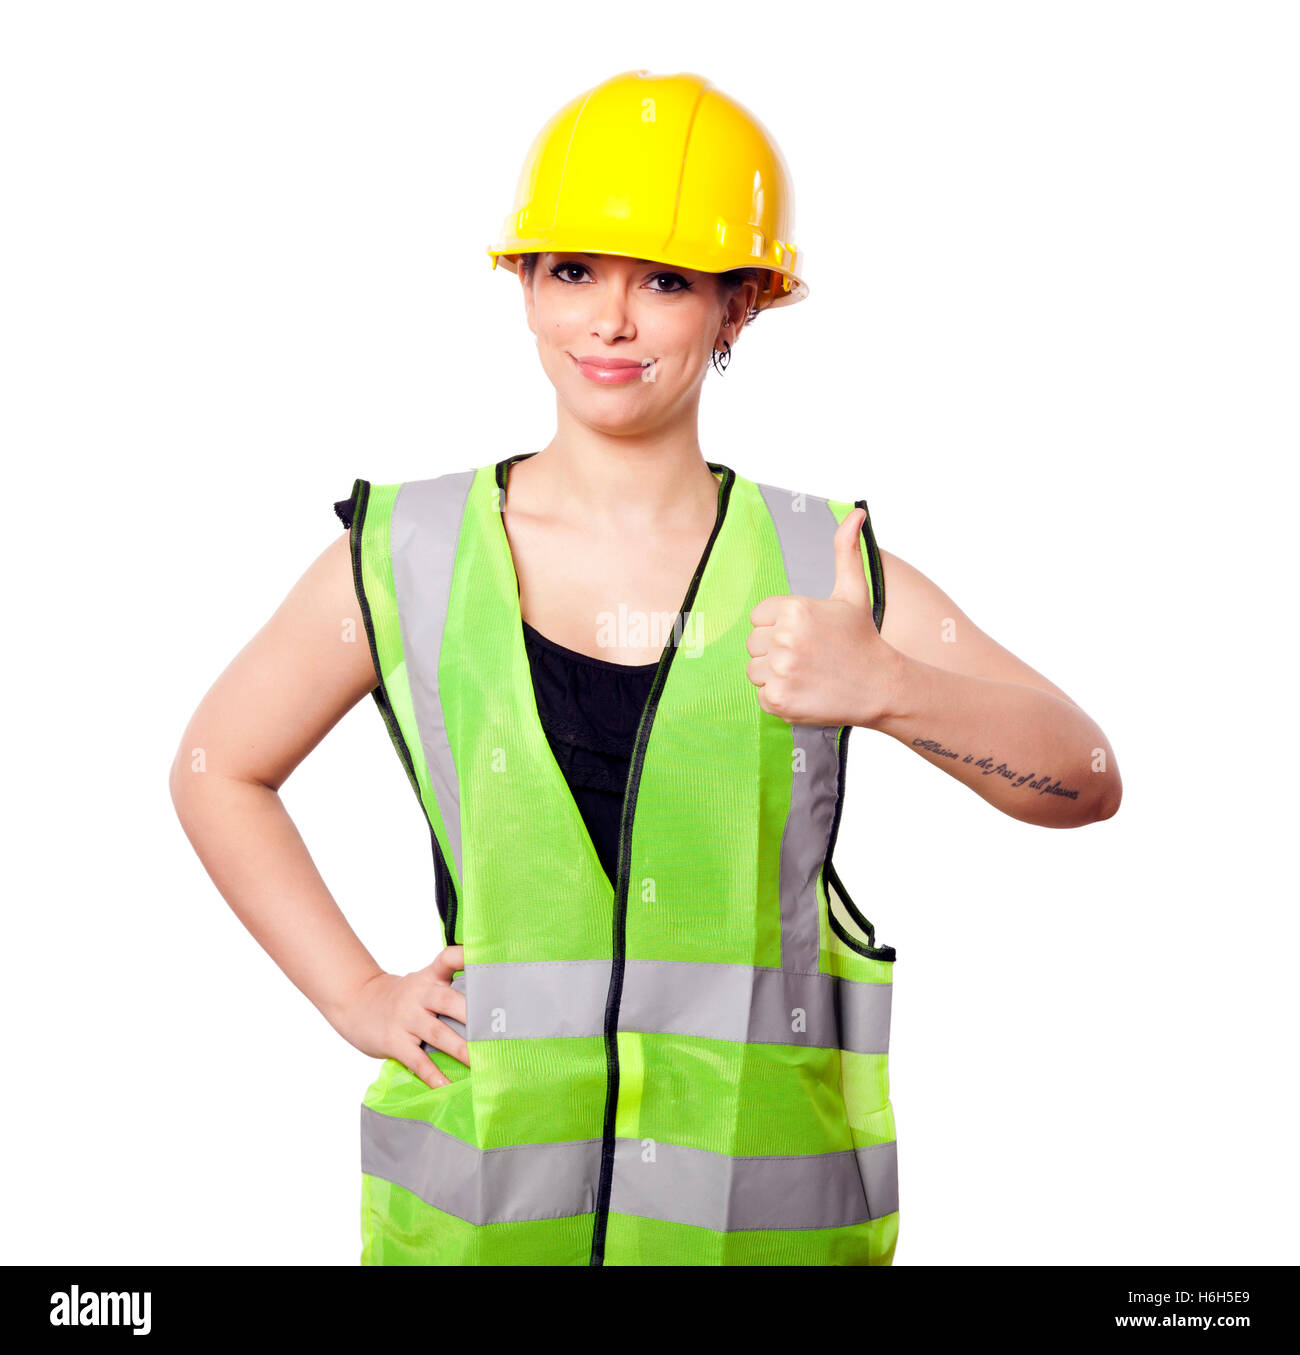 Caucasian young adult woman in her mid 20s wearing reflective yellow safety helmet and safety vest' giving the camera the thumbs Stock Photo